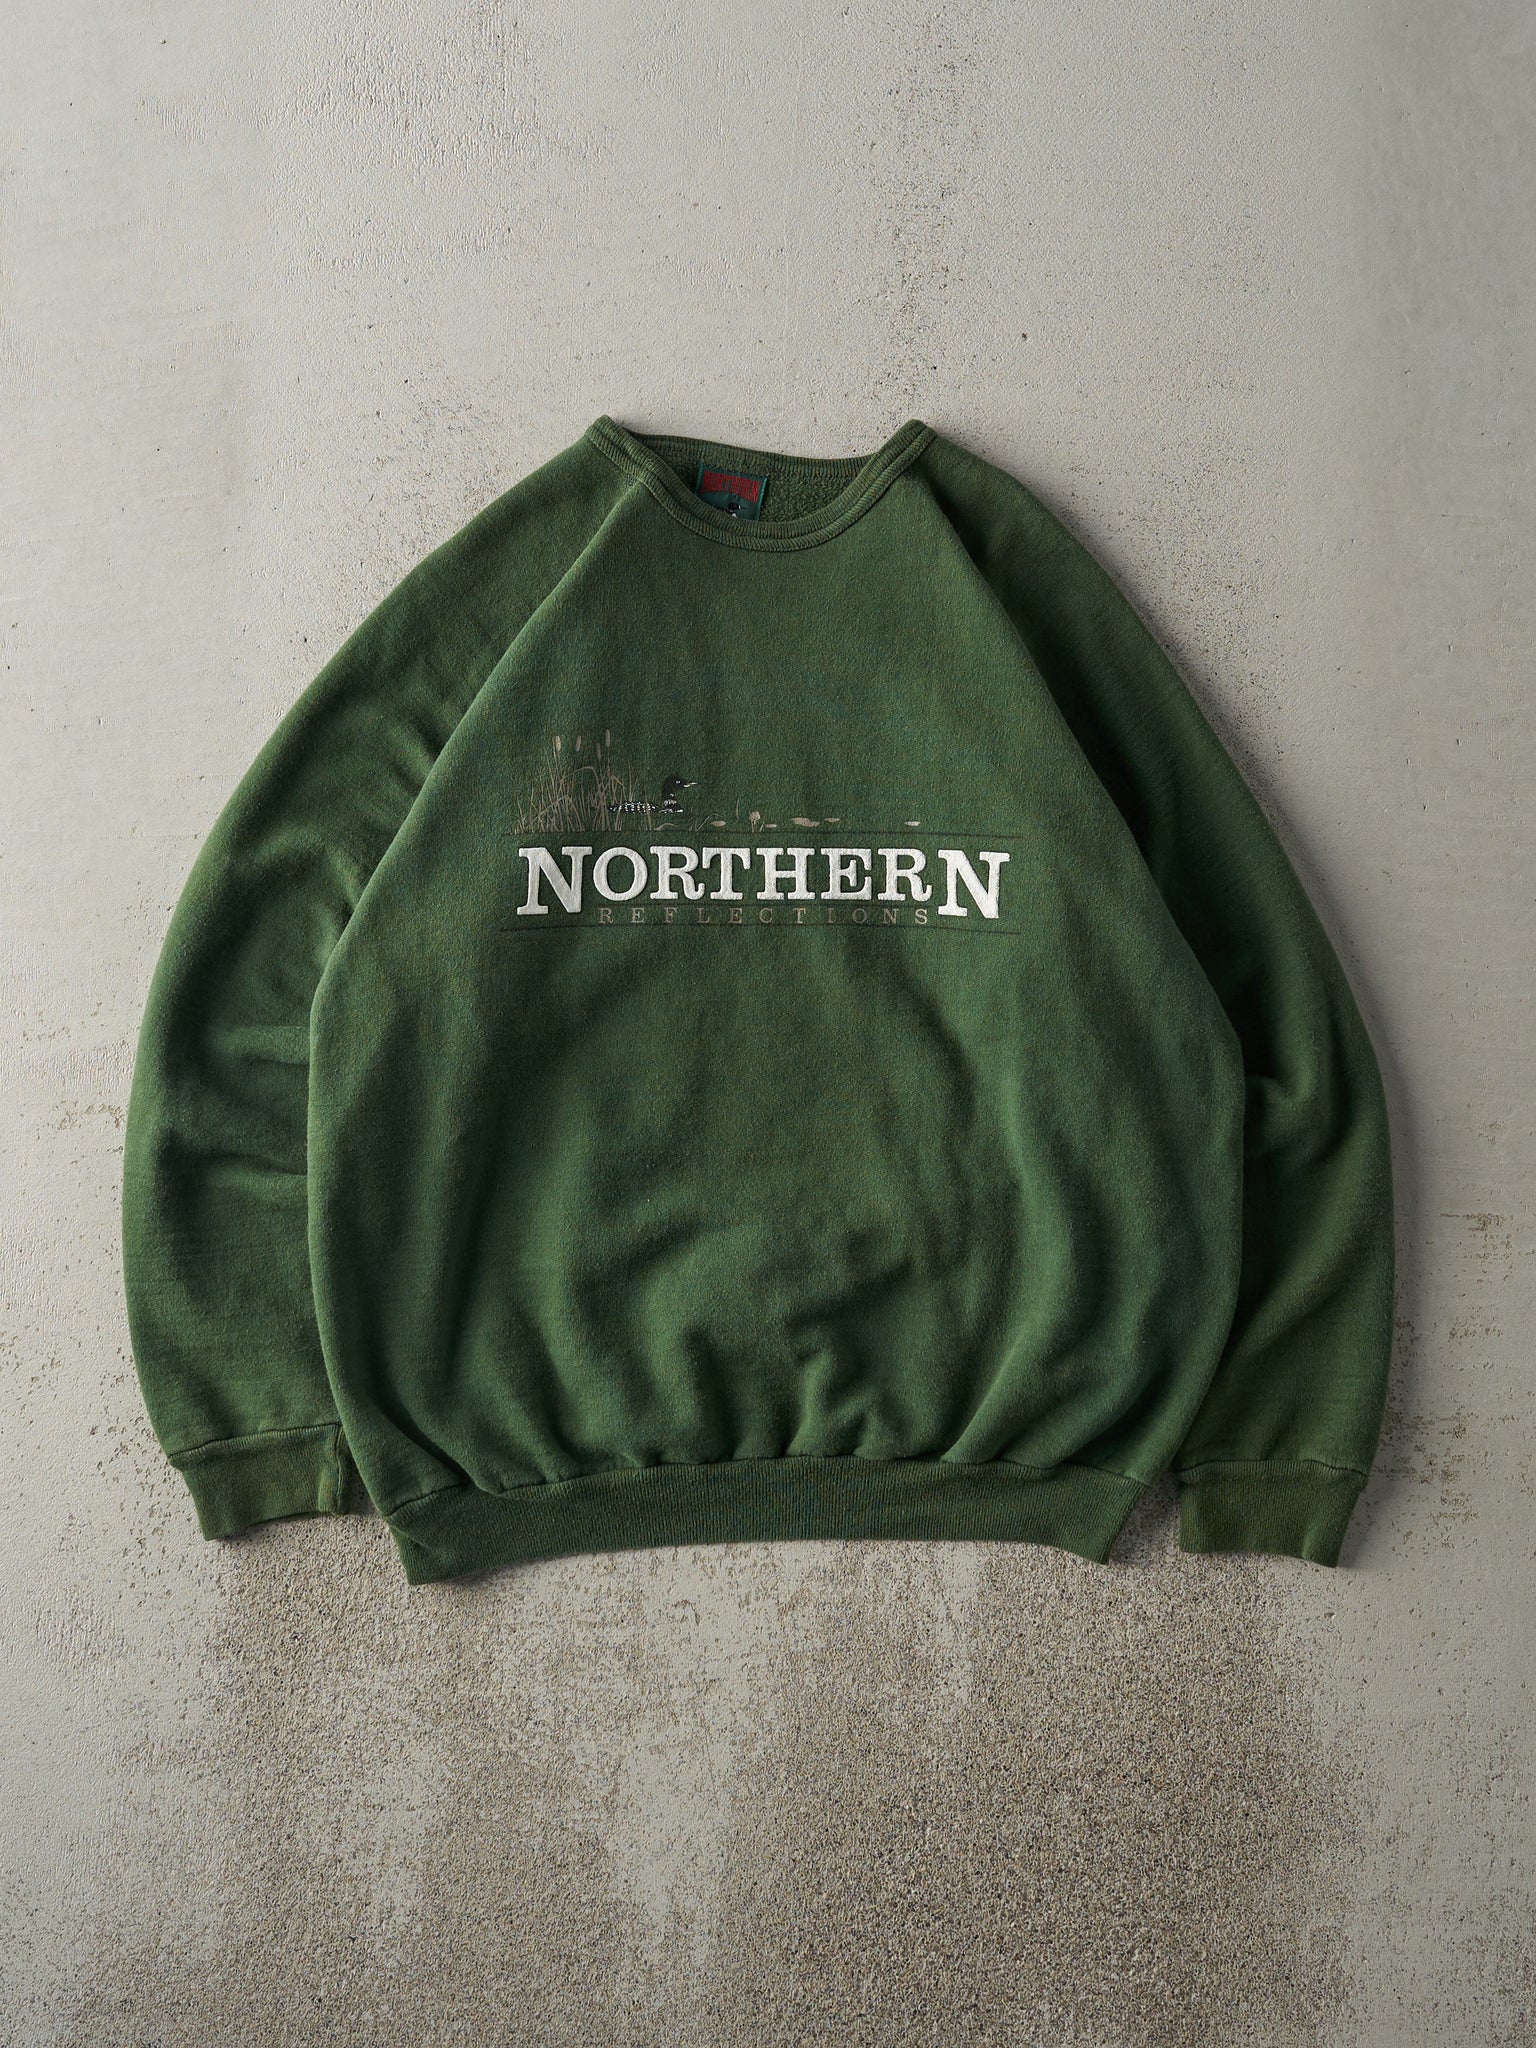 Vintage 90s Sun Faded Green Northern Reflections Crewneck (M/L)